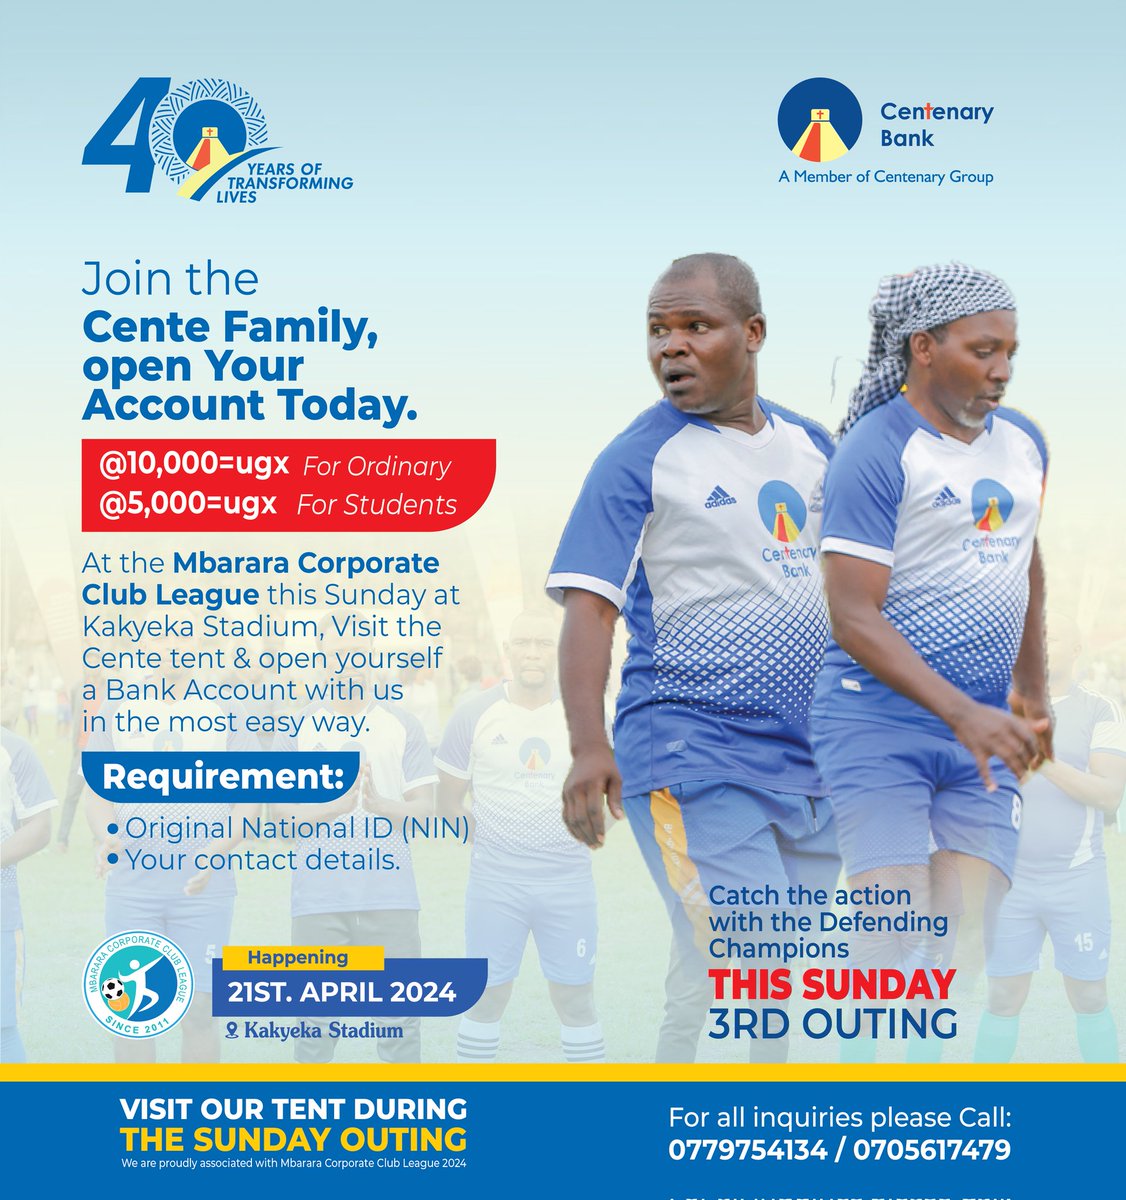 Our League Means More.... 
Join the @CentenaryBank Family while at our Outings. Open that Account. More opportunities for Ordinary people and students. 

Carry that National ID & small small change of 5k or 10k and join the #SmartLife #BetterLife